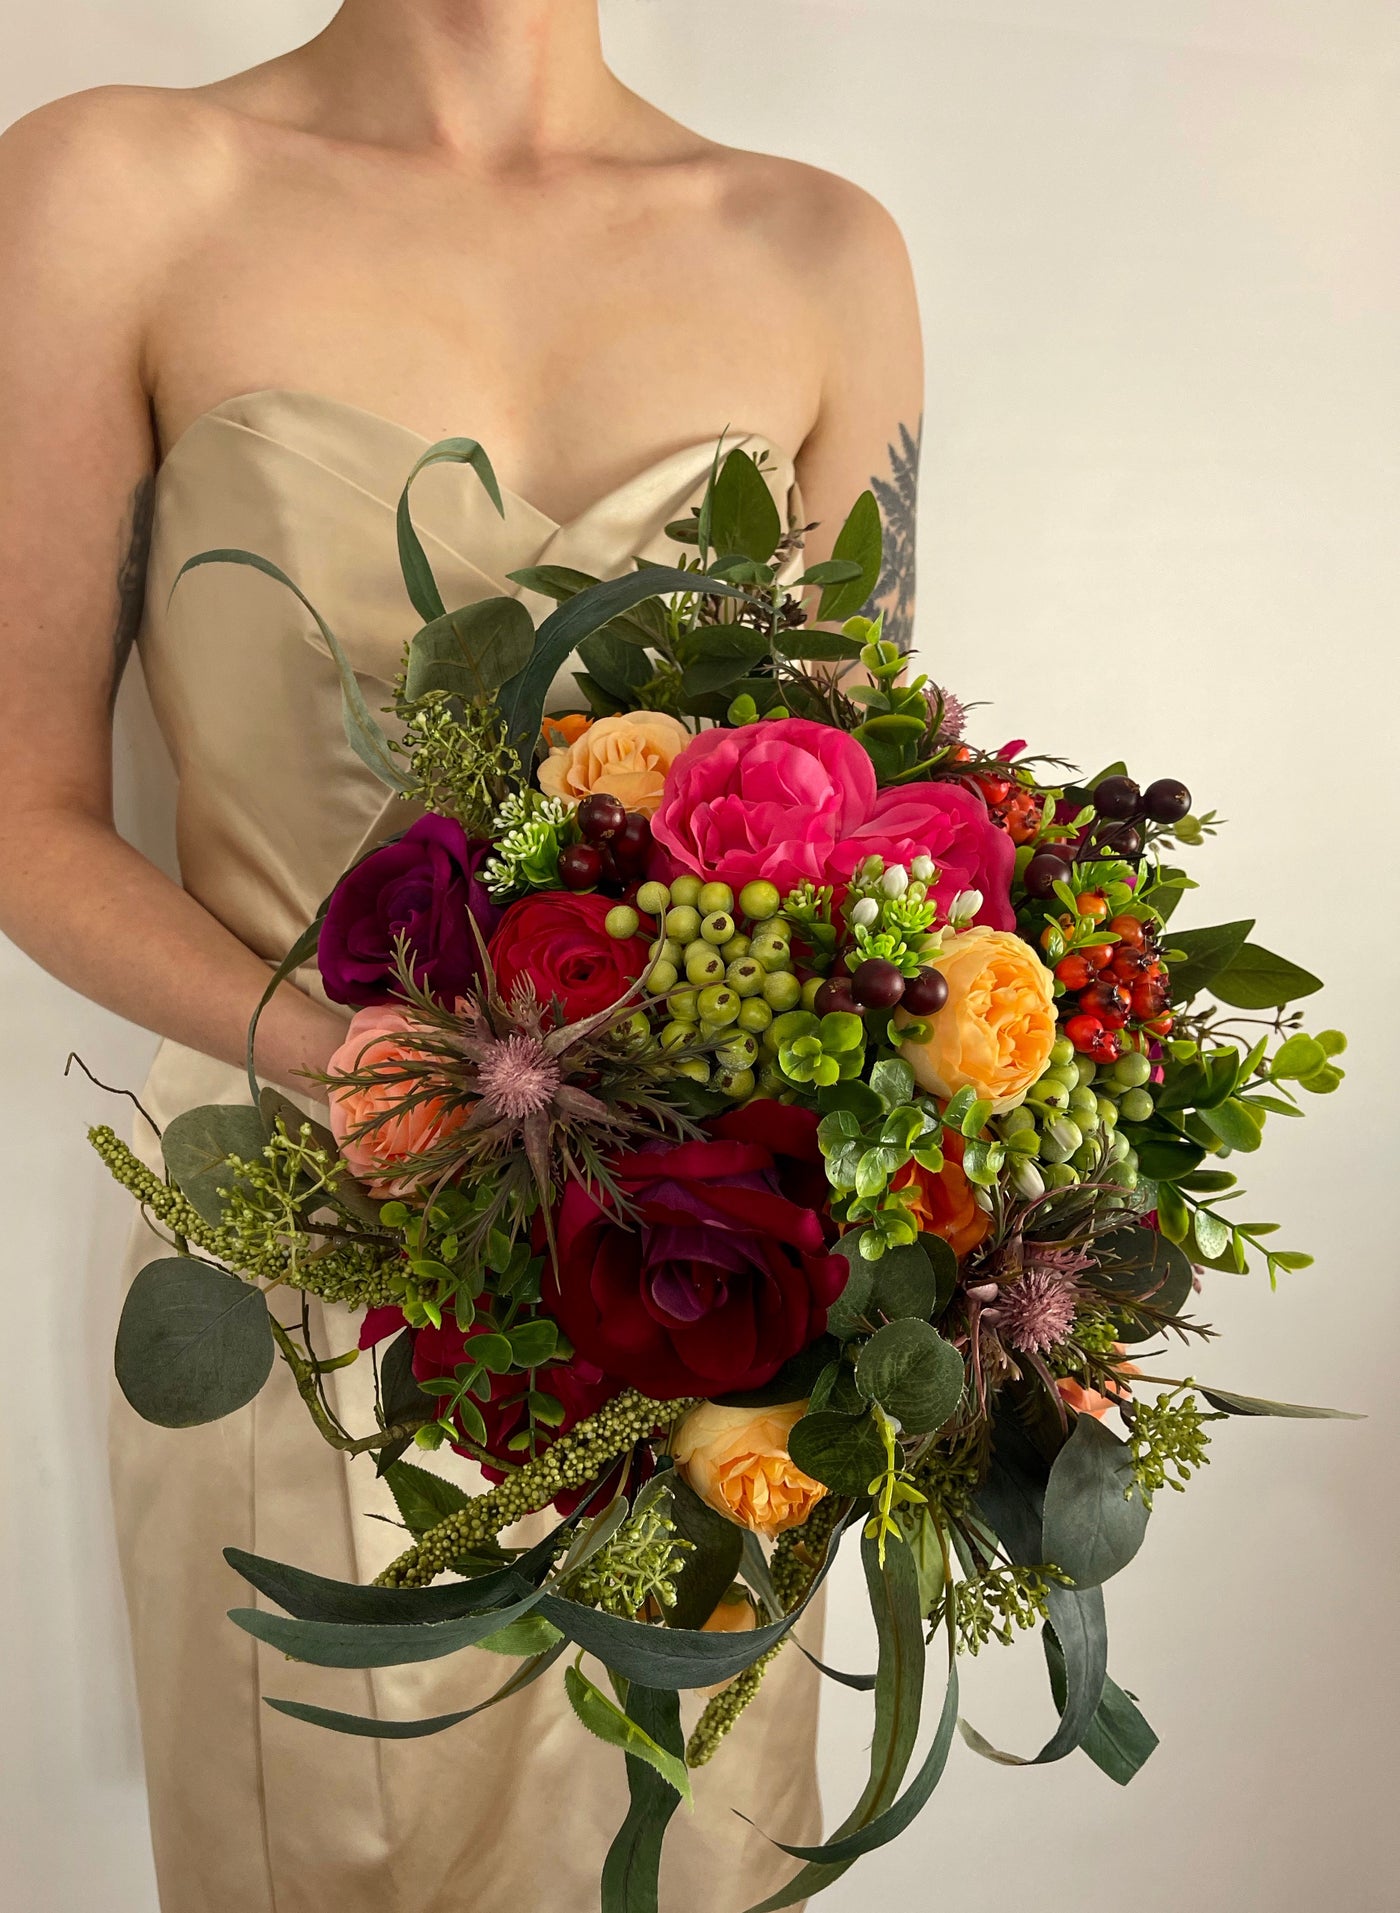 Rent a Rose-Bridesmaid Bouquet- Jewel toned rich colors of Burgundy orange, fuchsia make up this oversized bouquet.Rent for five days for $69.00